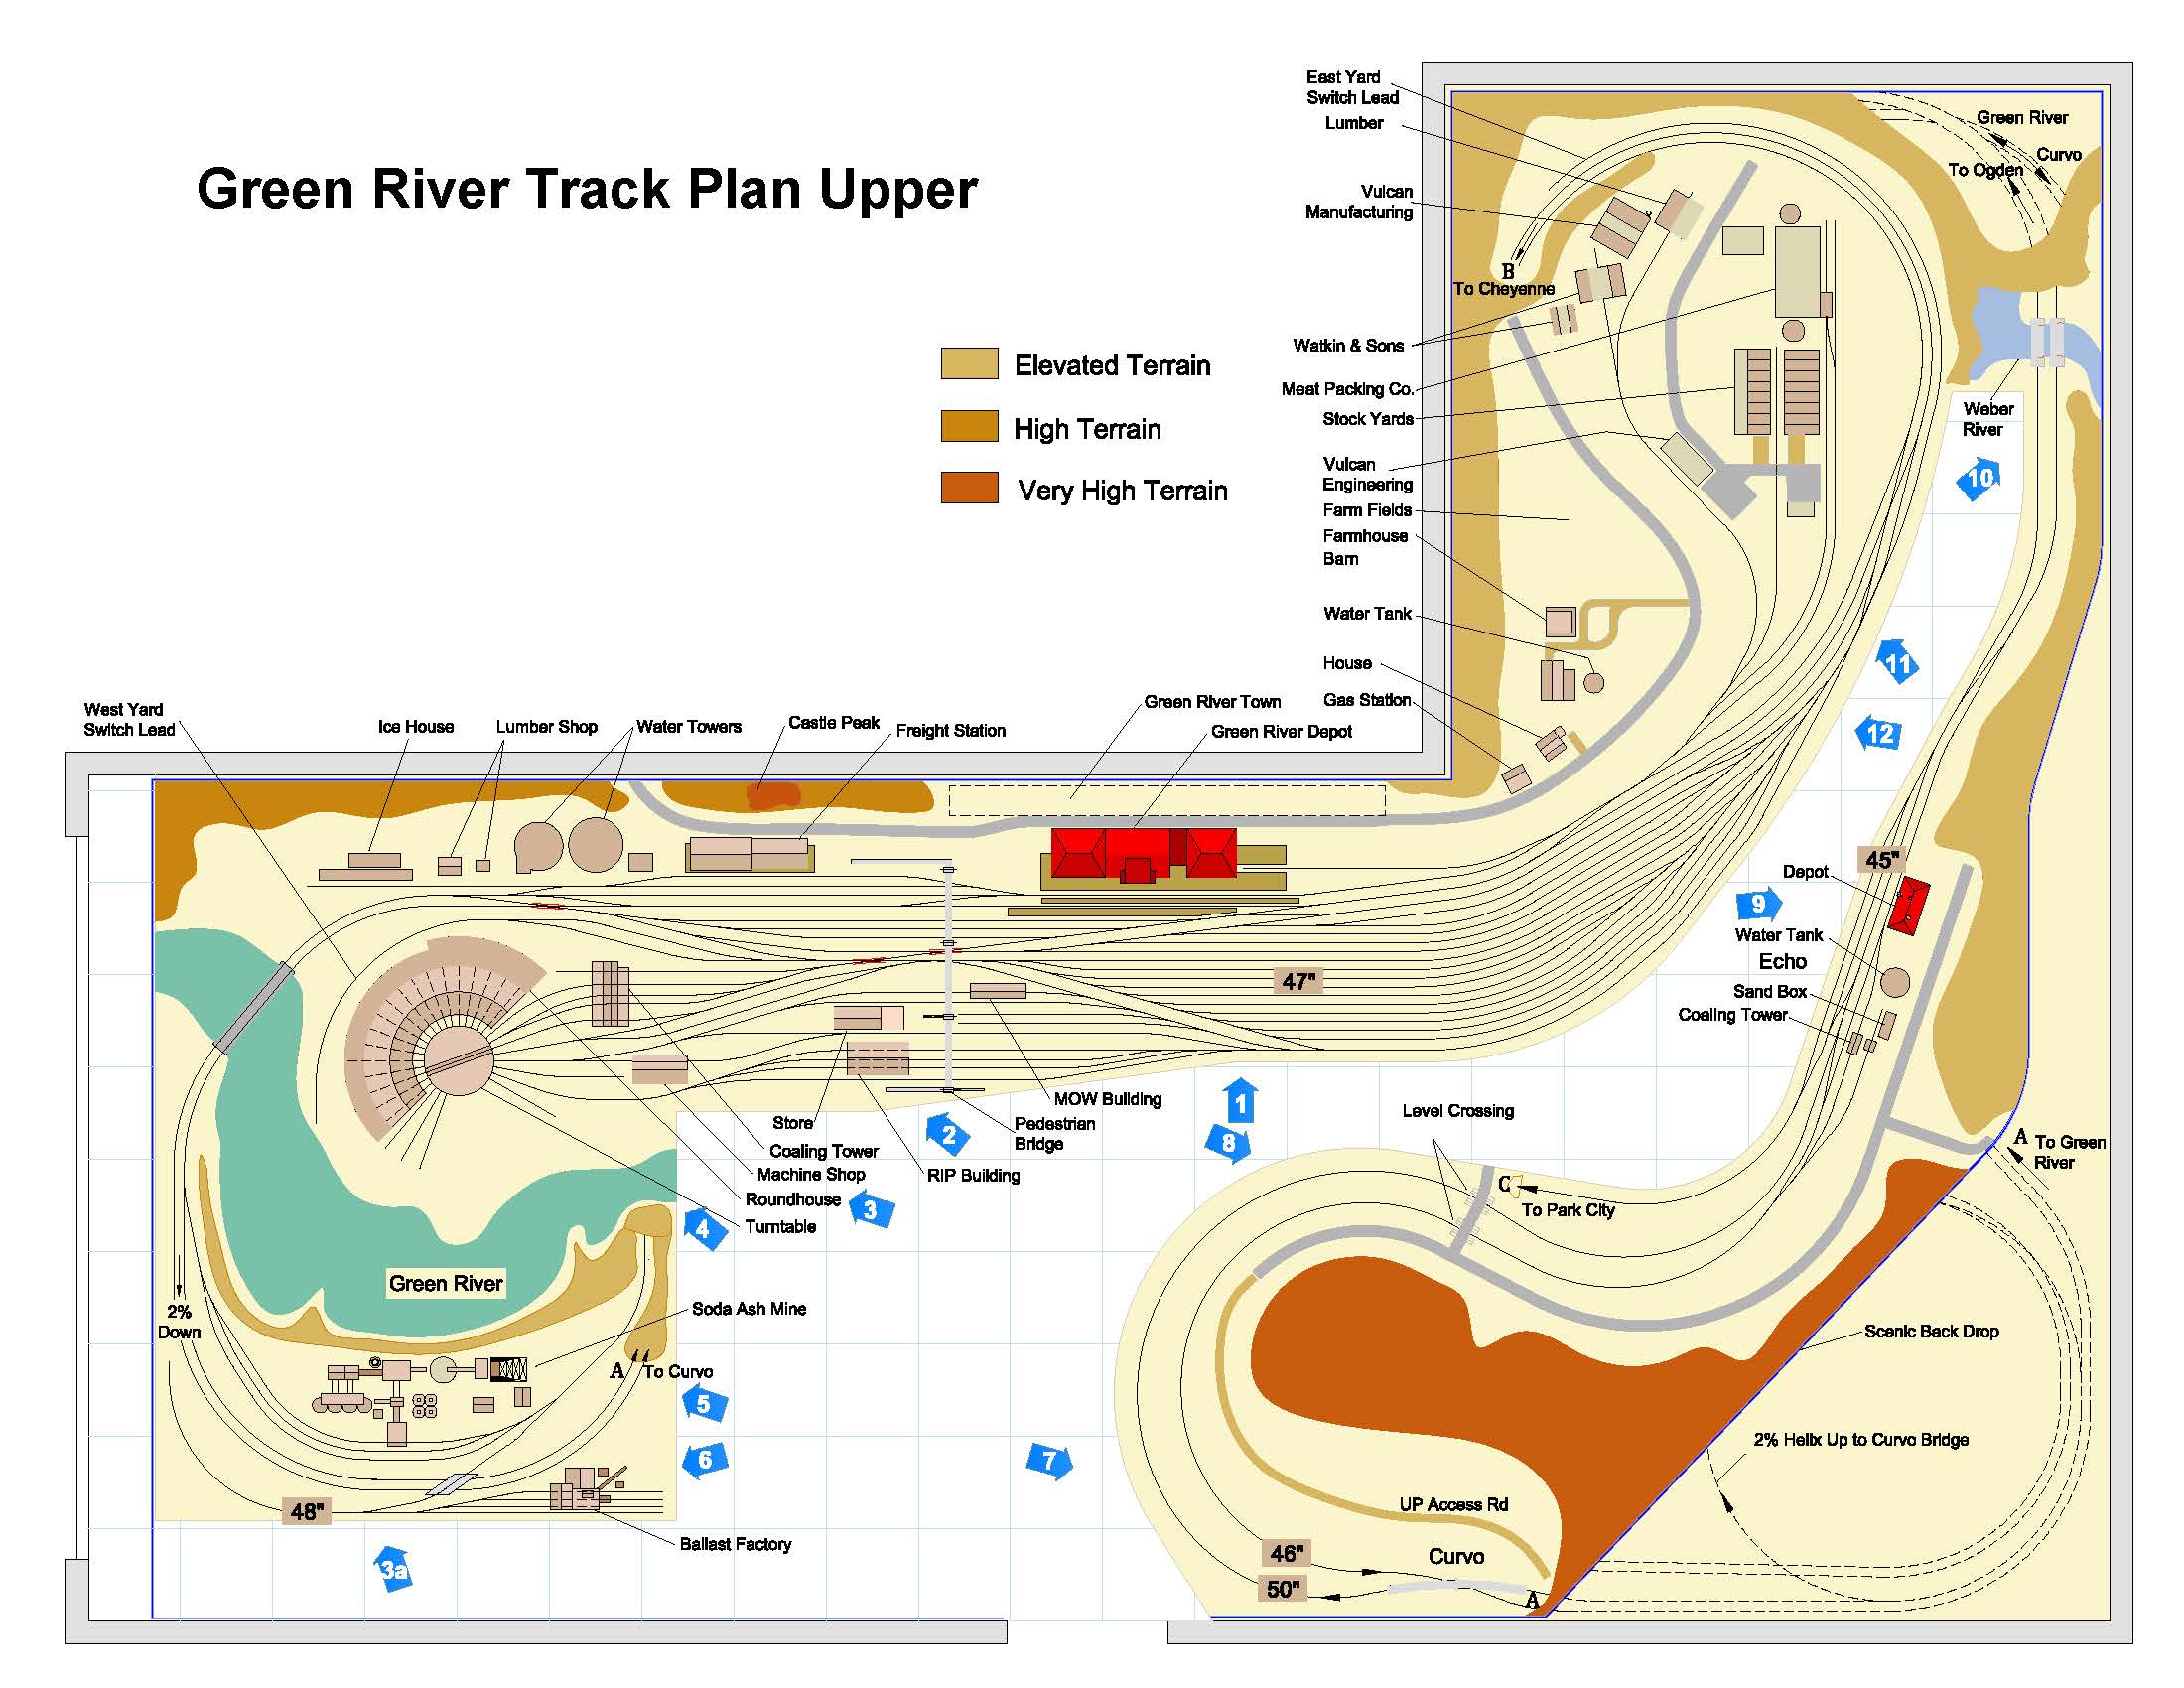 The Green River layout in HO scale: An image of a model railroad trackplan